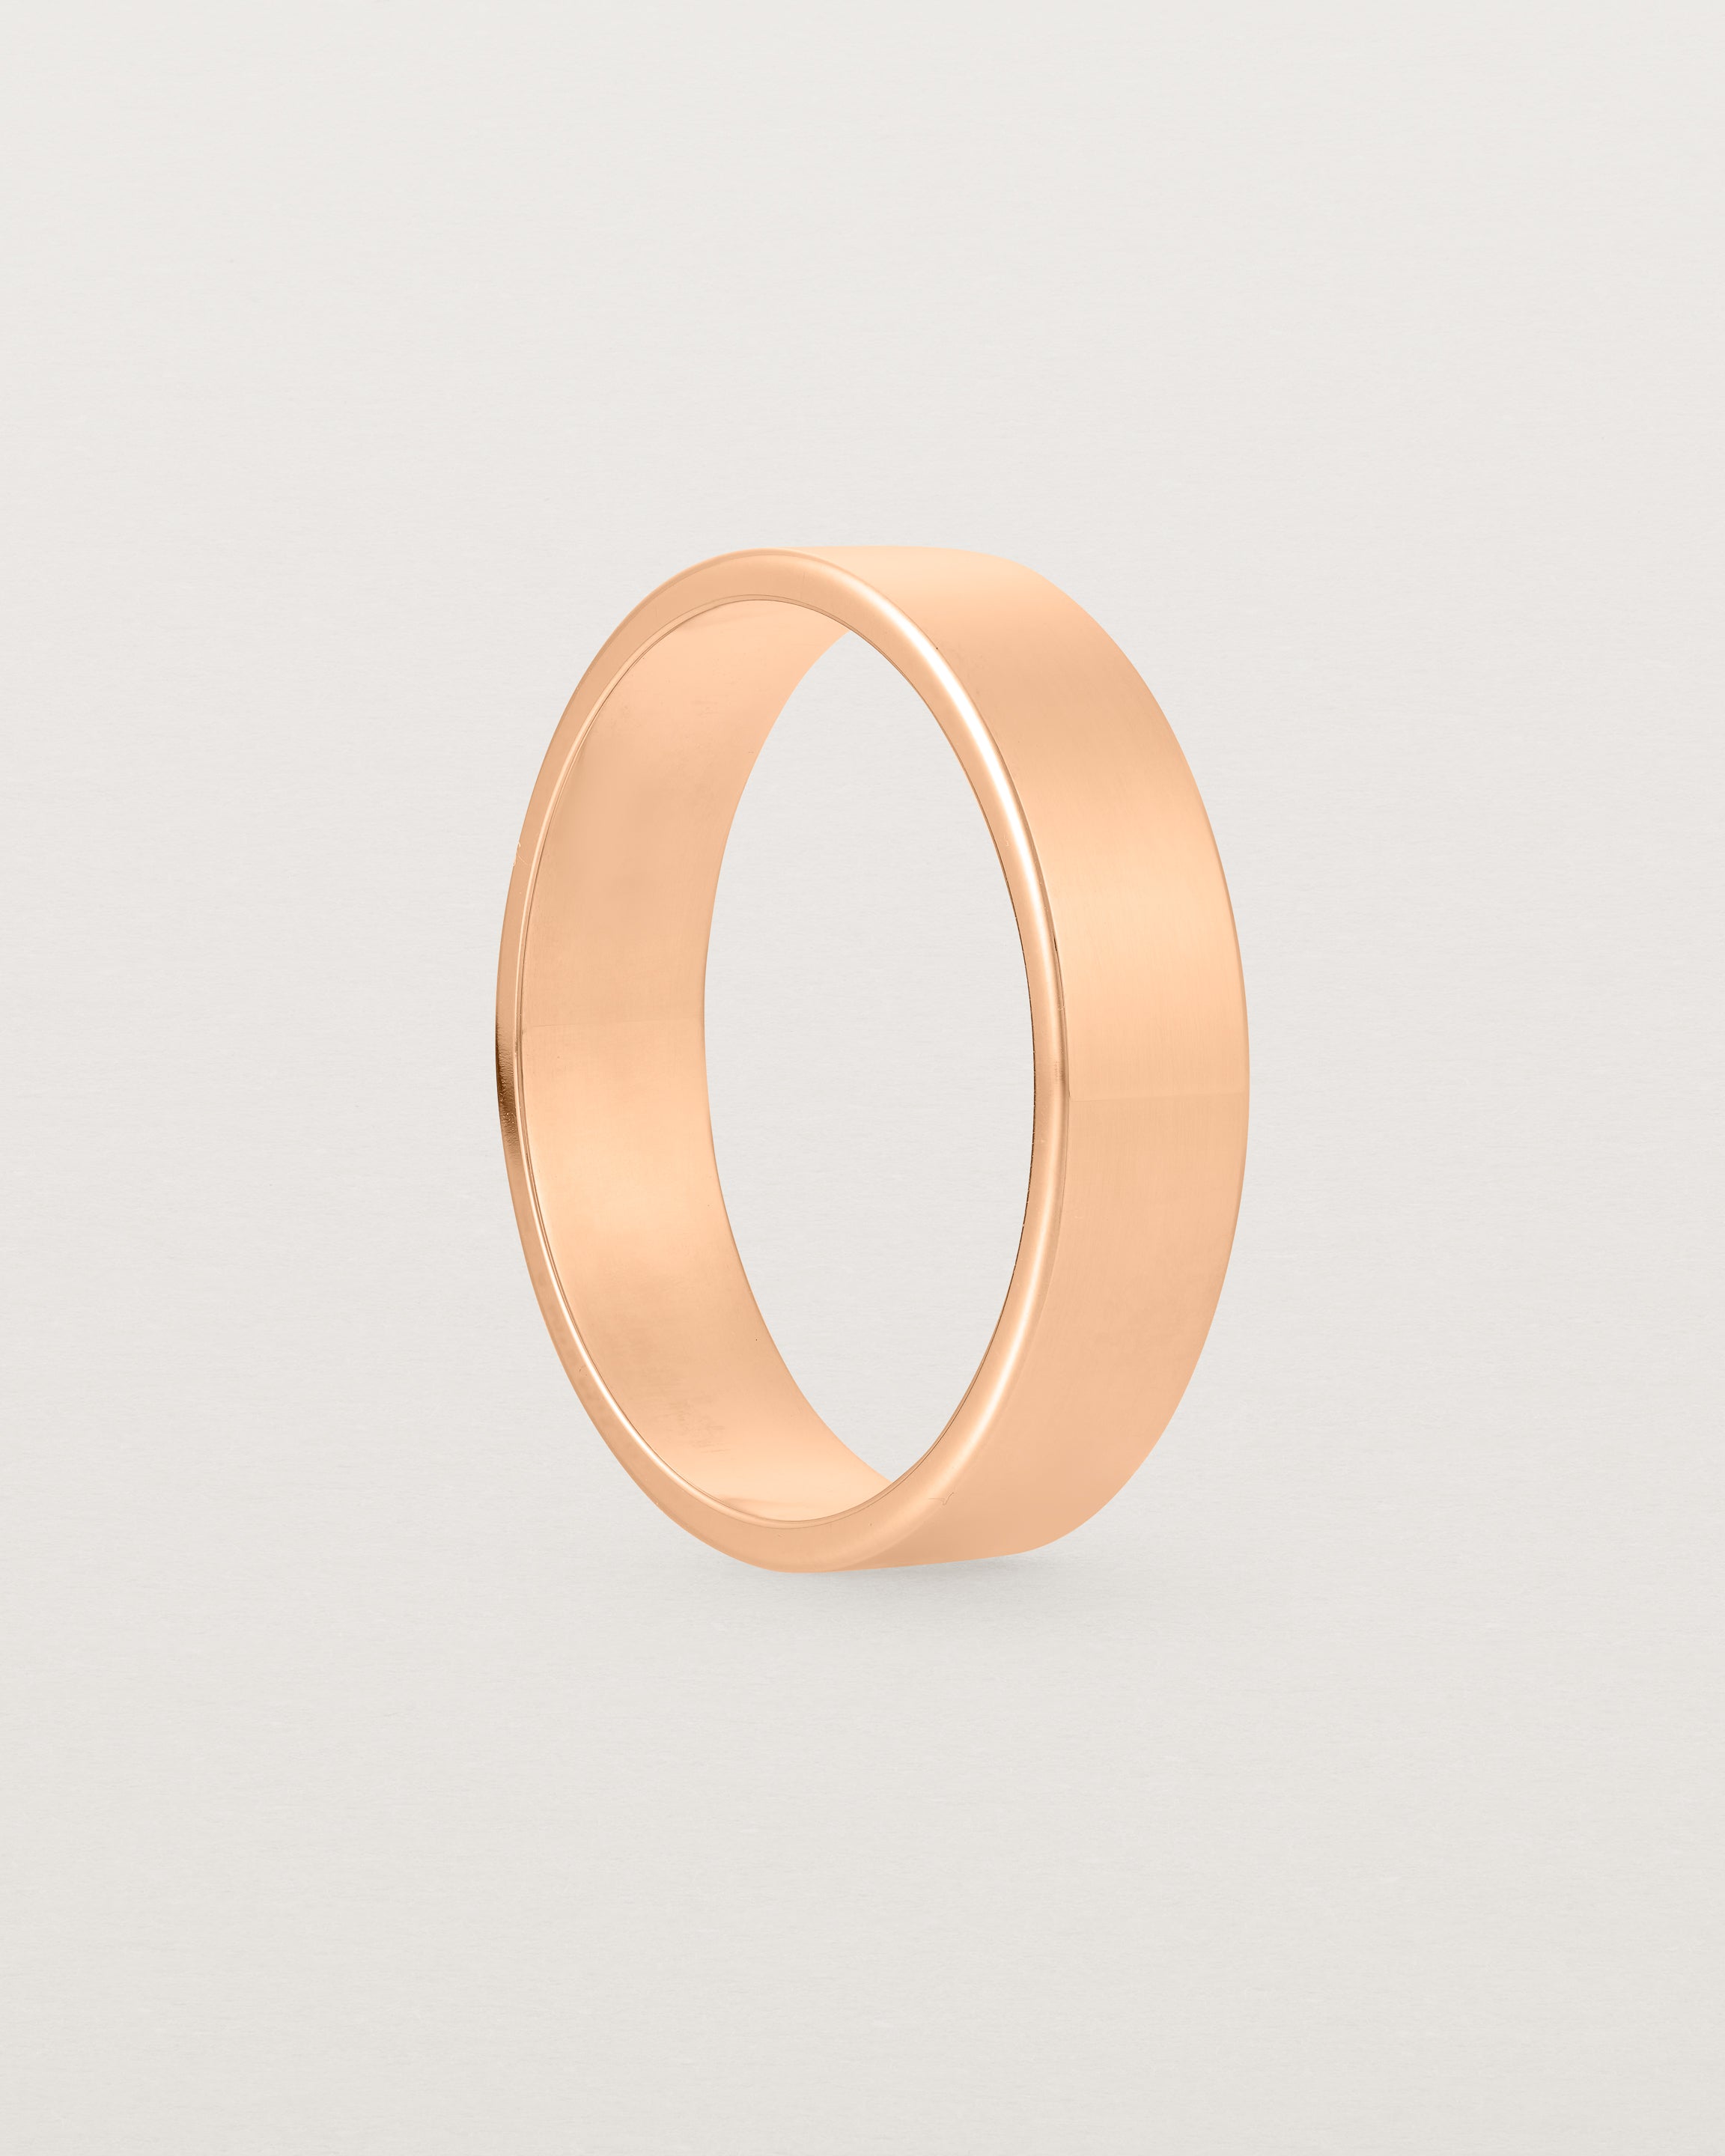 Side profile of our square, flat 5mm profile wedding band crafted in rose gold